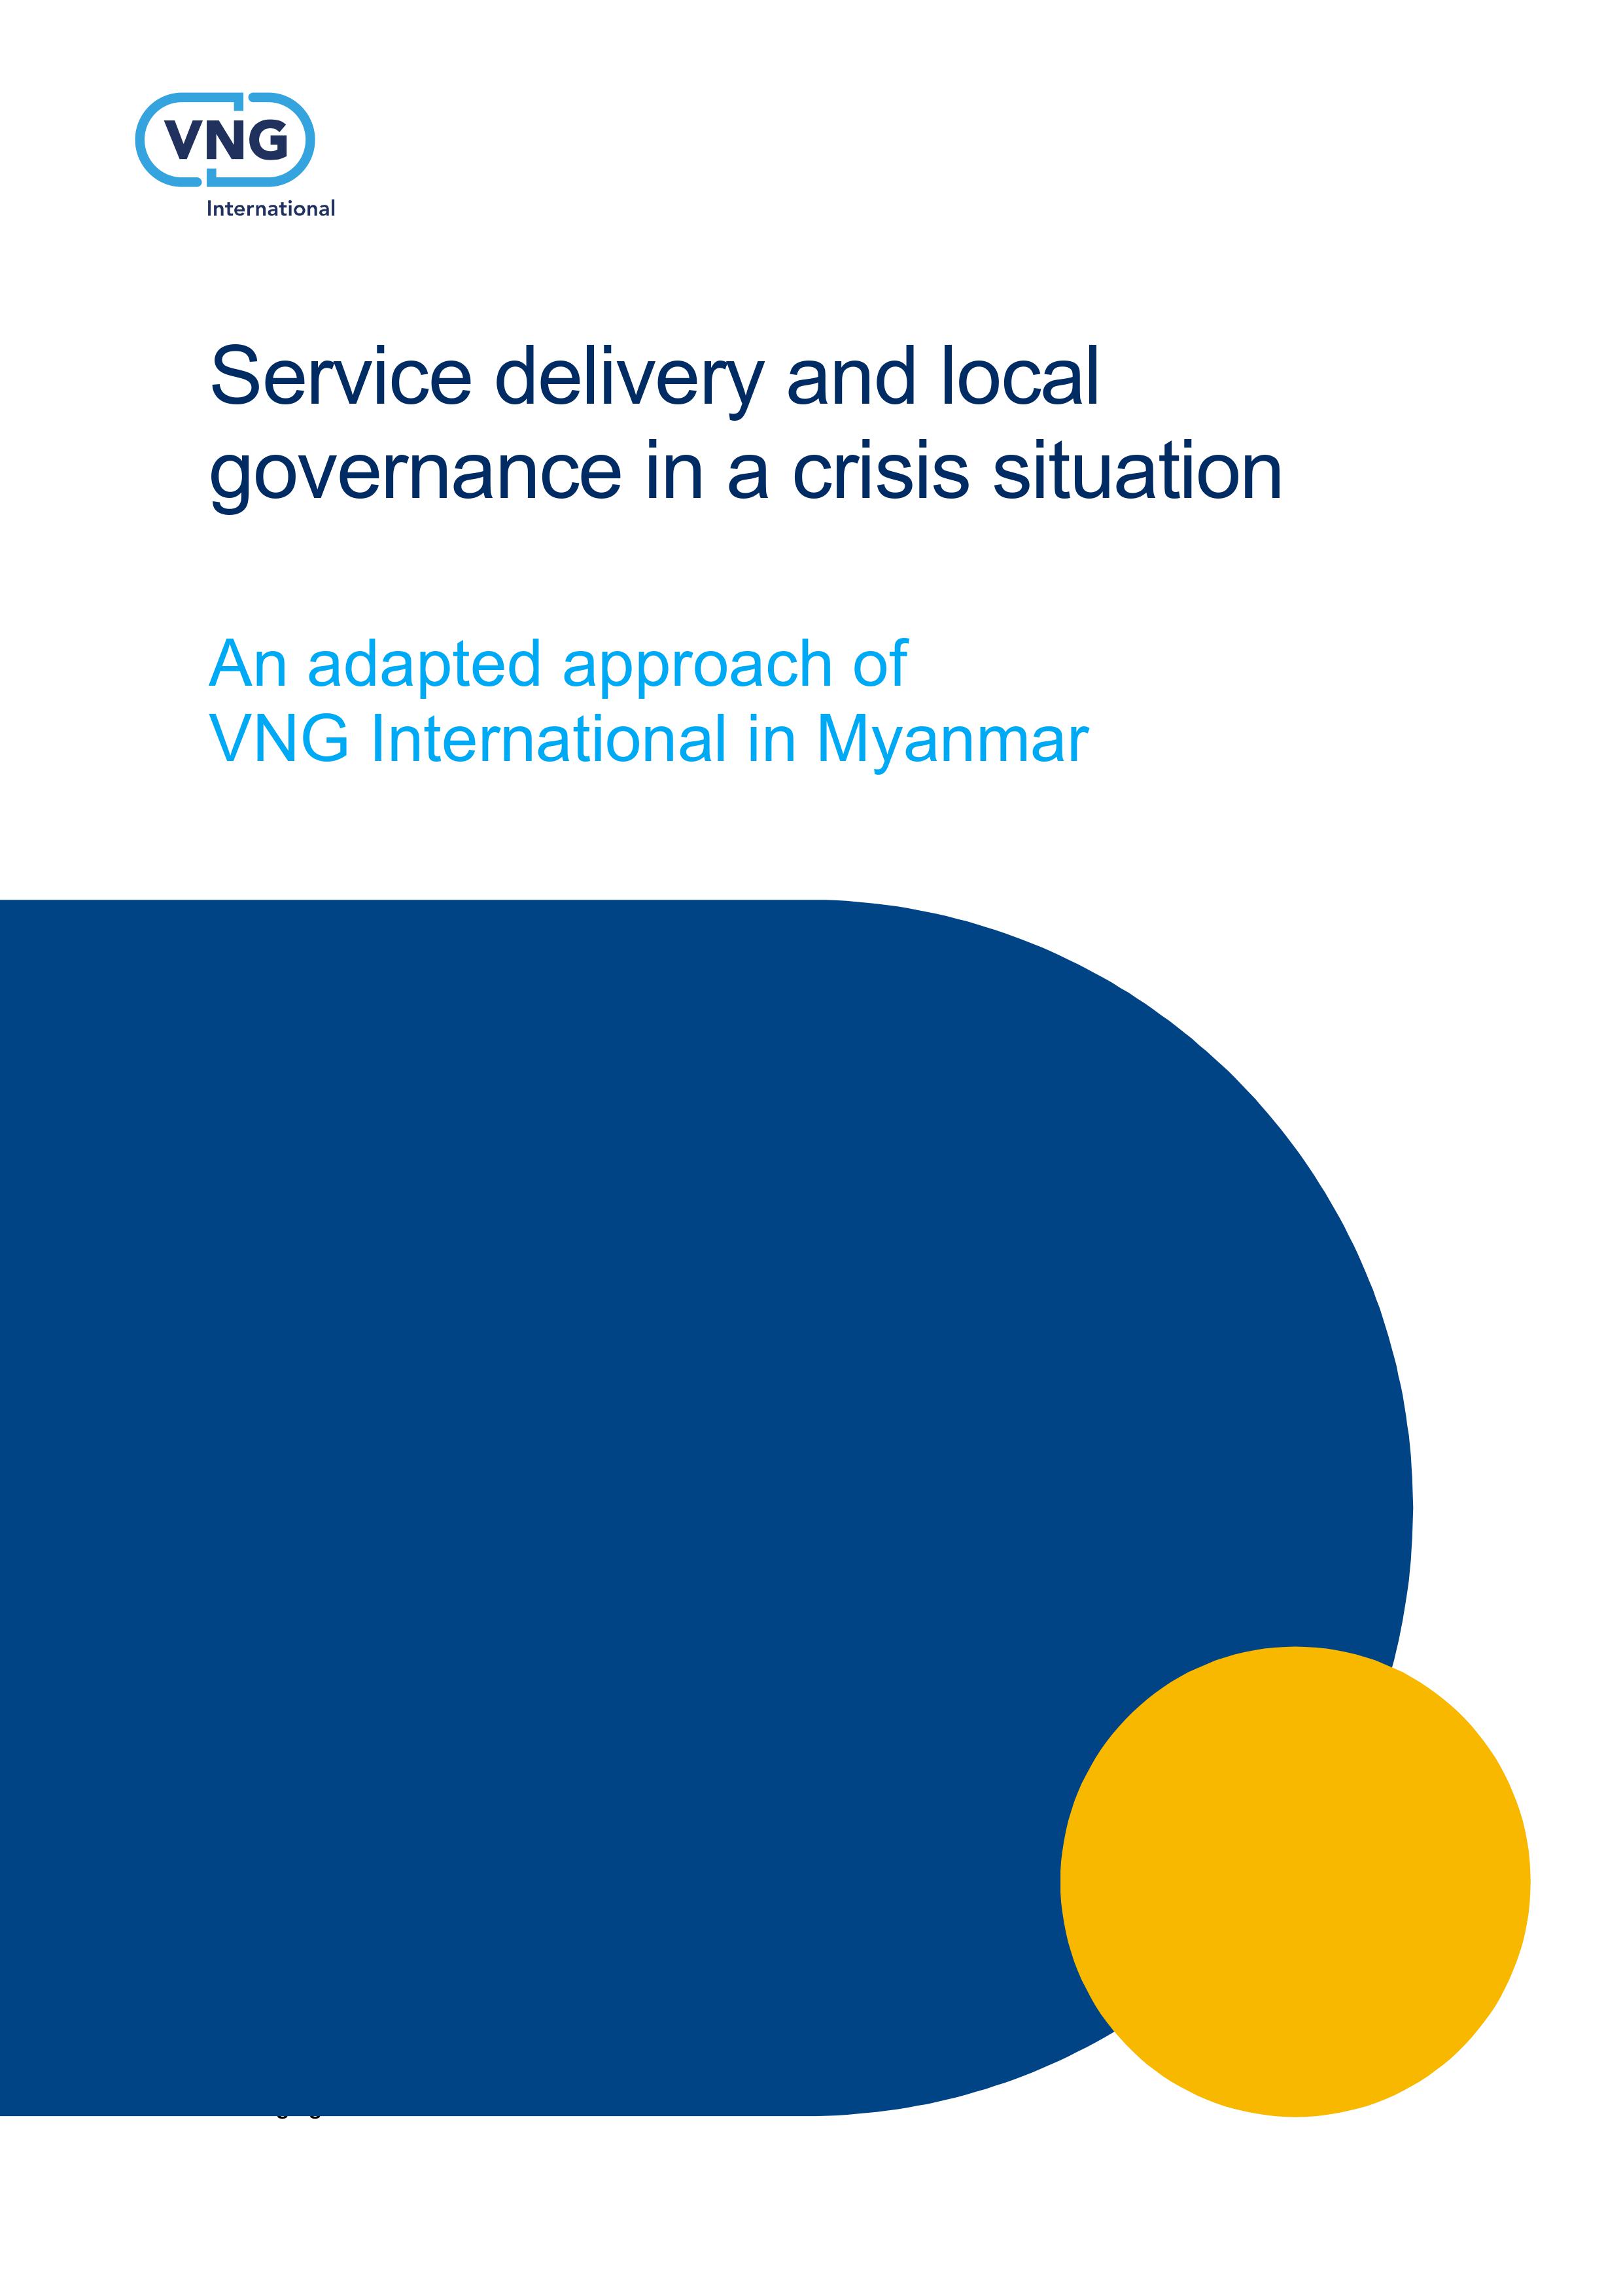 Service delivery and local governance in a crisis situation